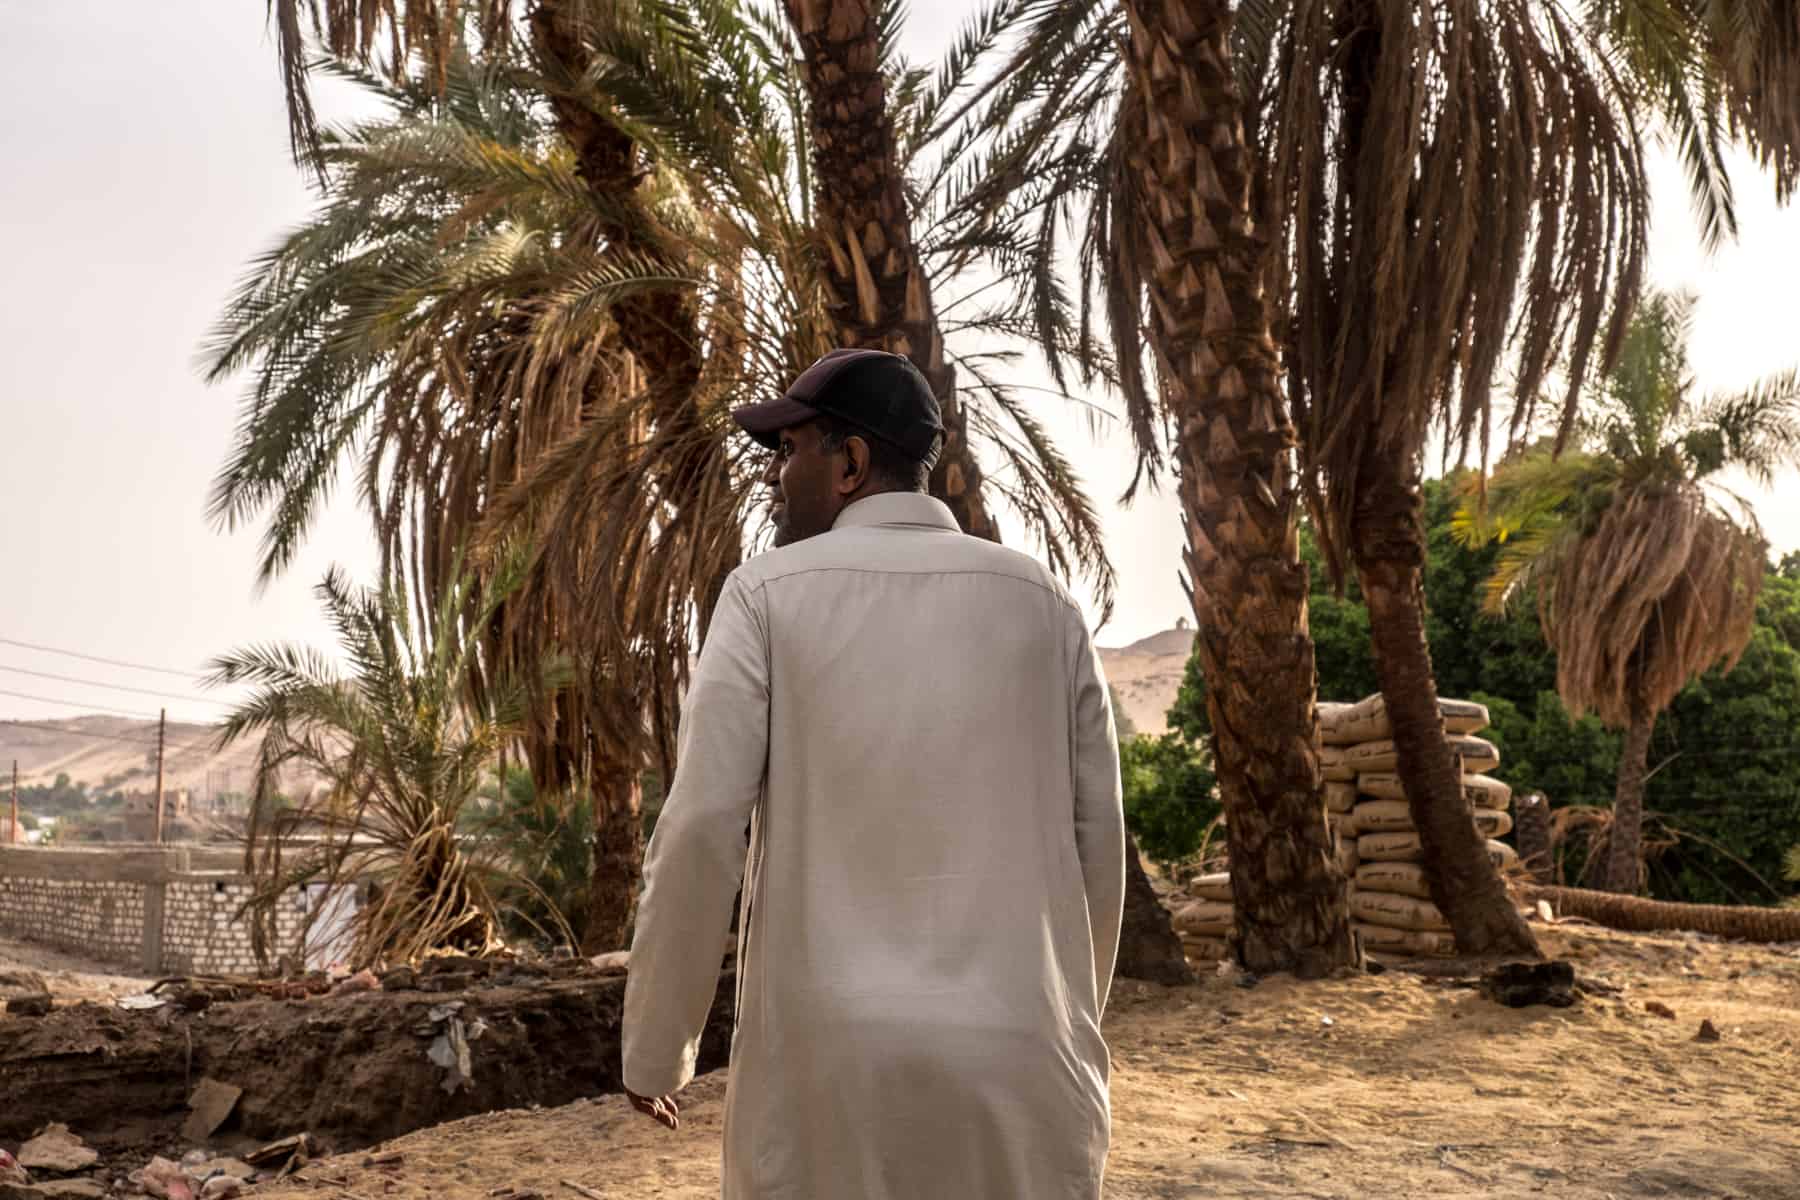 A Nubian man, dressed in a long white tunic in front of lush trees in his village on the banks of the Nile in Aswan, Egypt